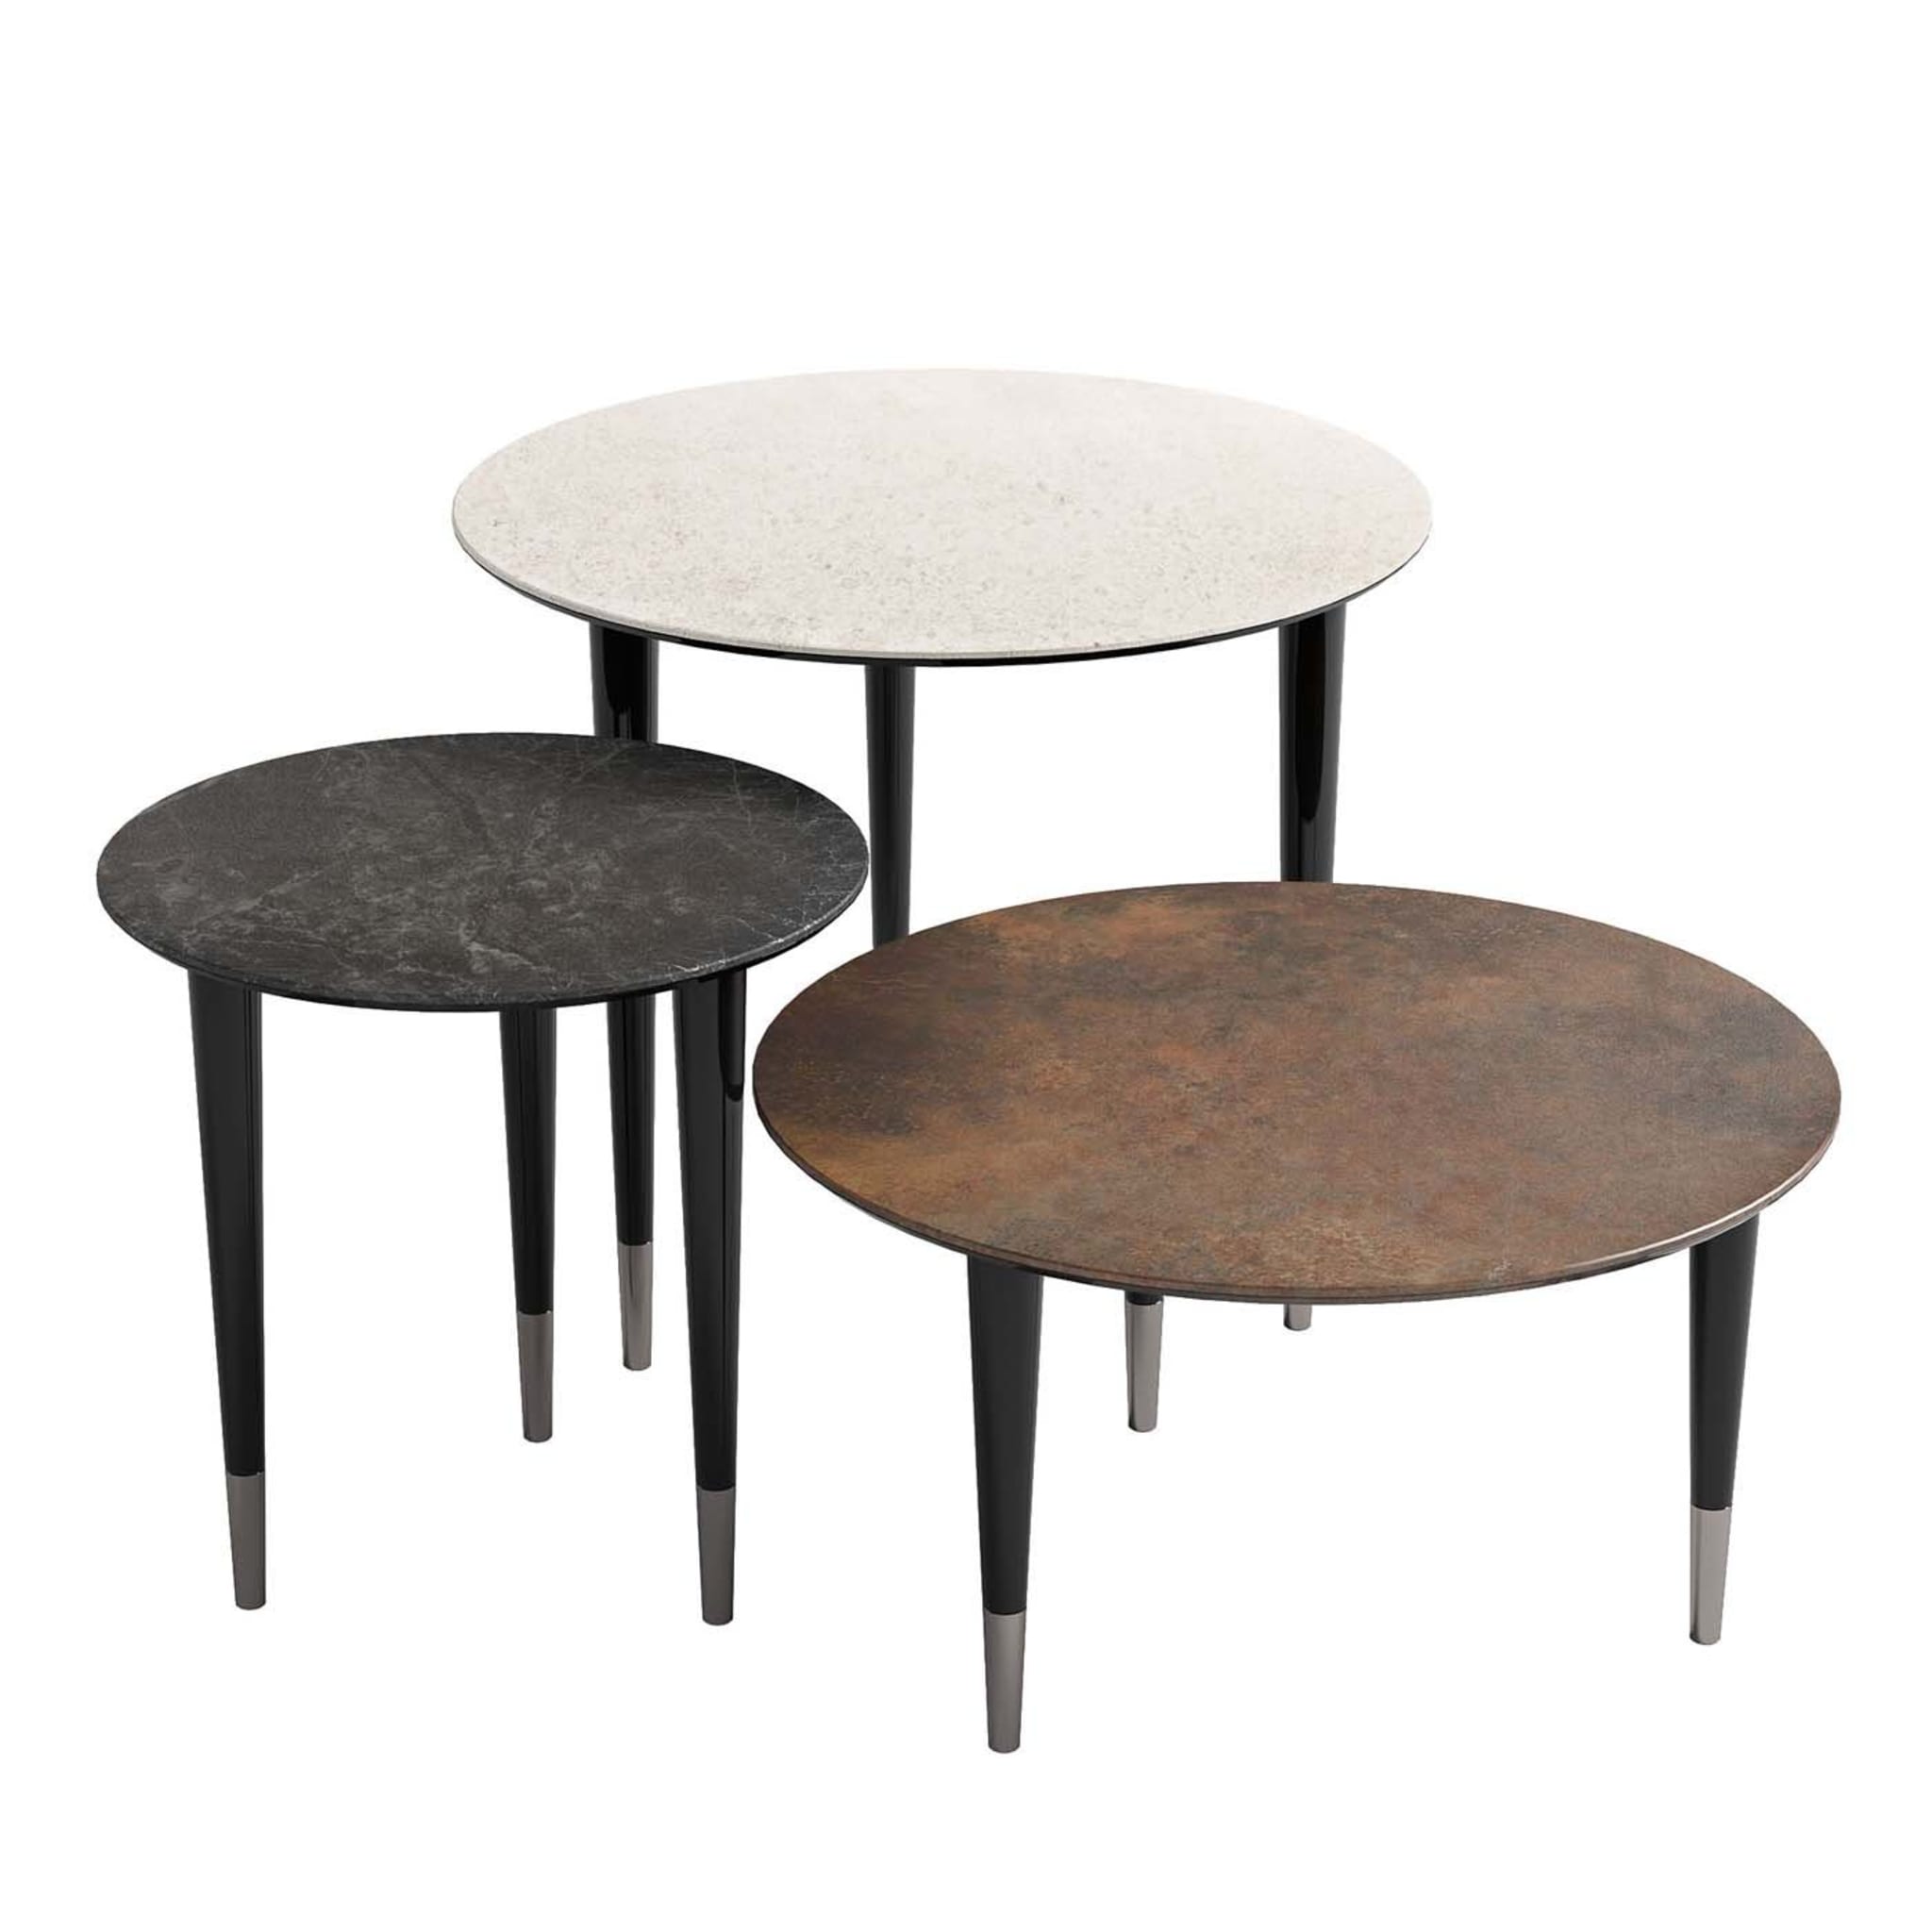 Trendy Set of 3 Nesting Tables - Main view